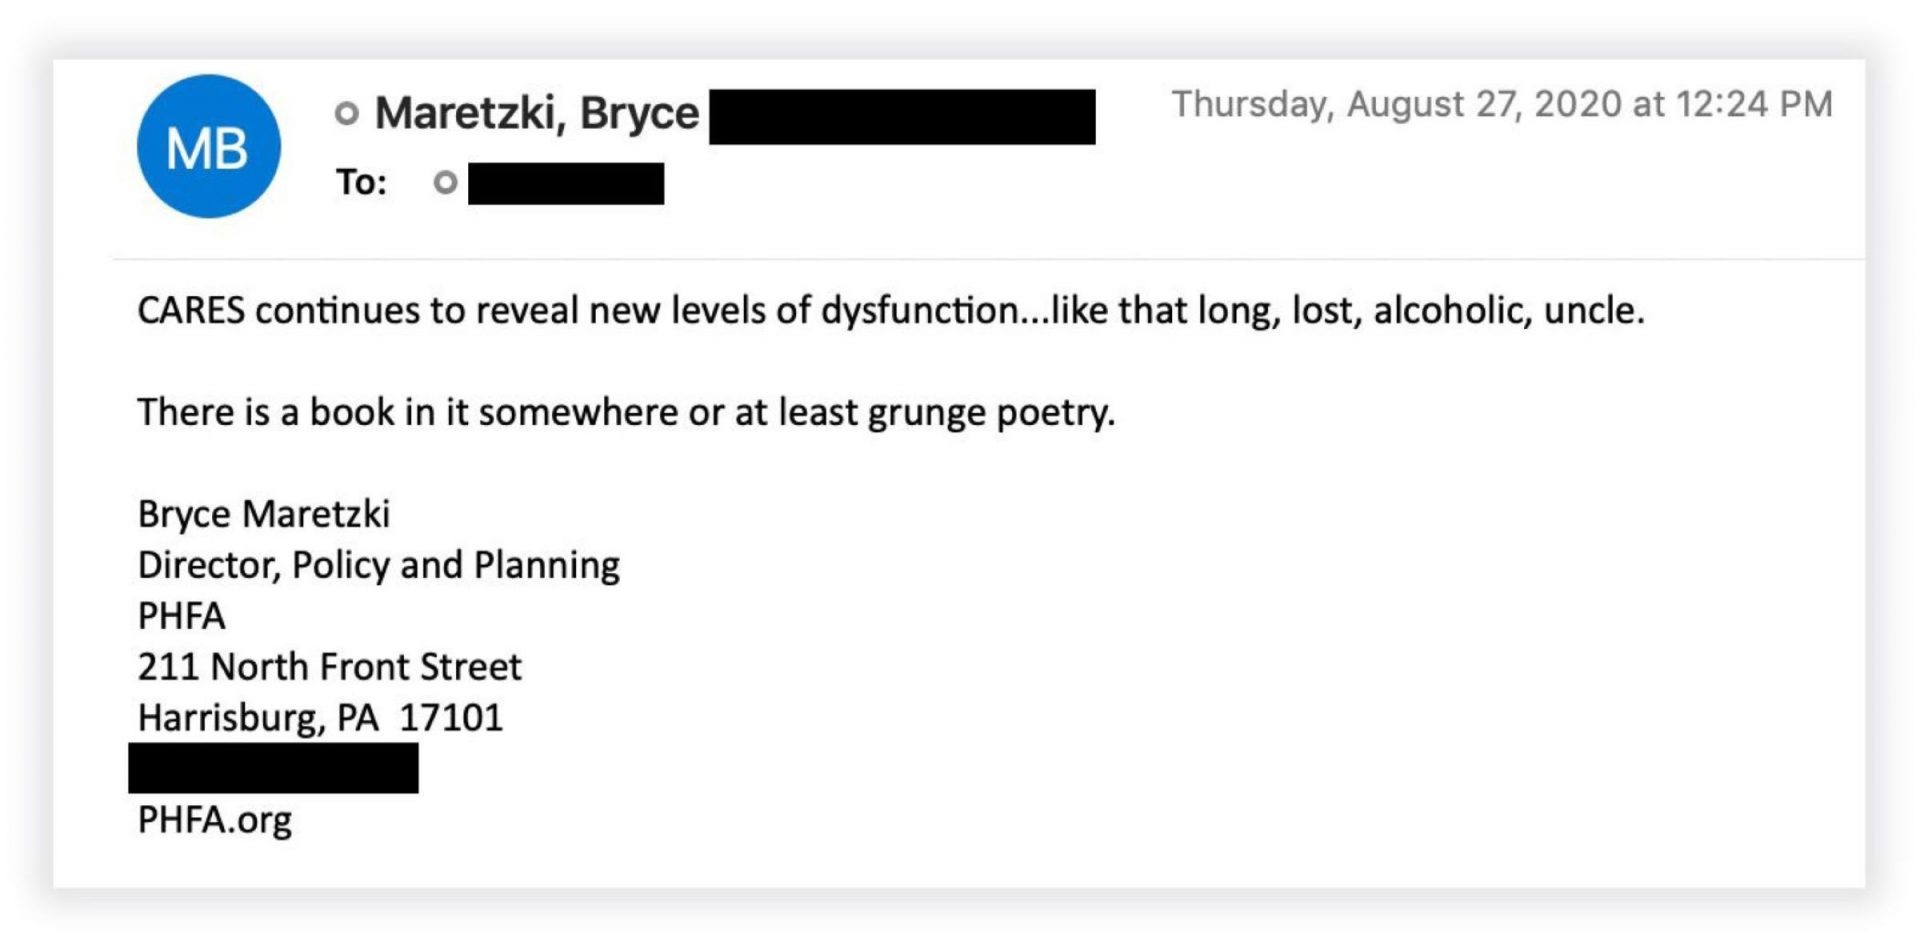 In an email, Bryce Maretzki, a senior official at the Pennsylvania Housing Finance Agency, complained about the problems of the state's CARES-funded rental assistance program. Email addresses and phone numbers have been redacted.